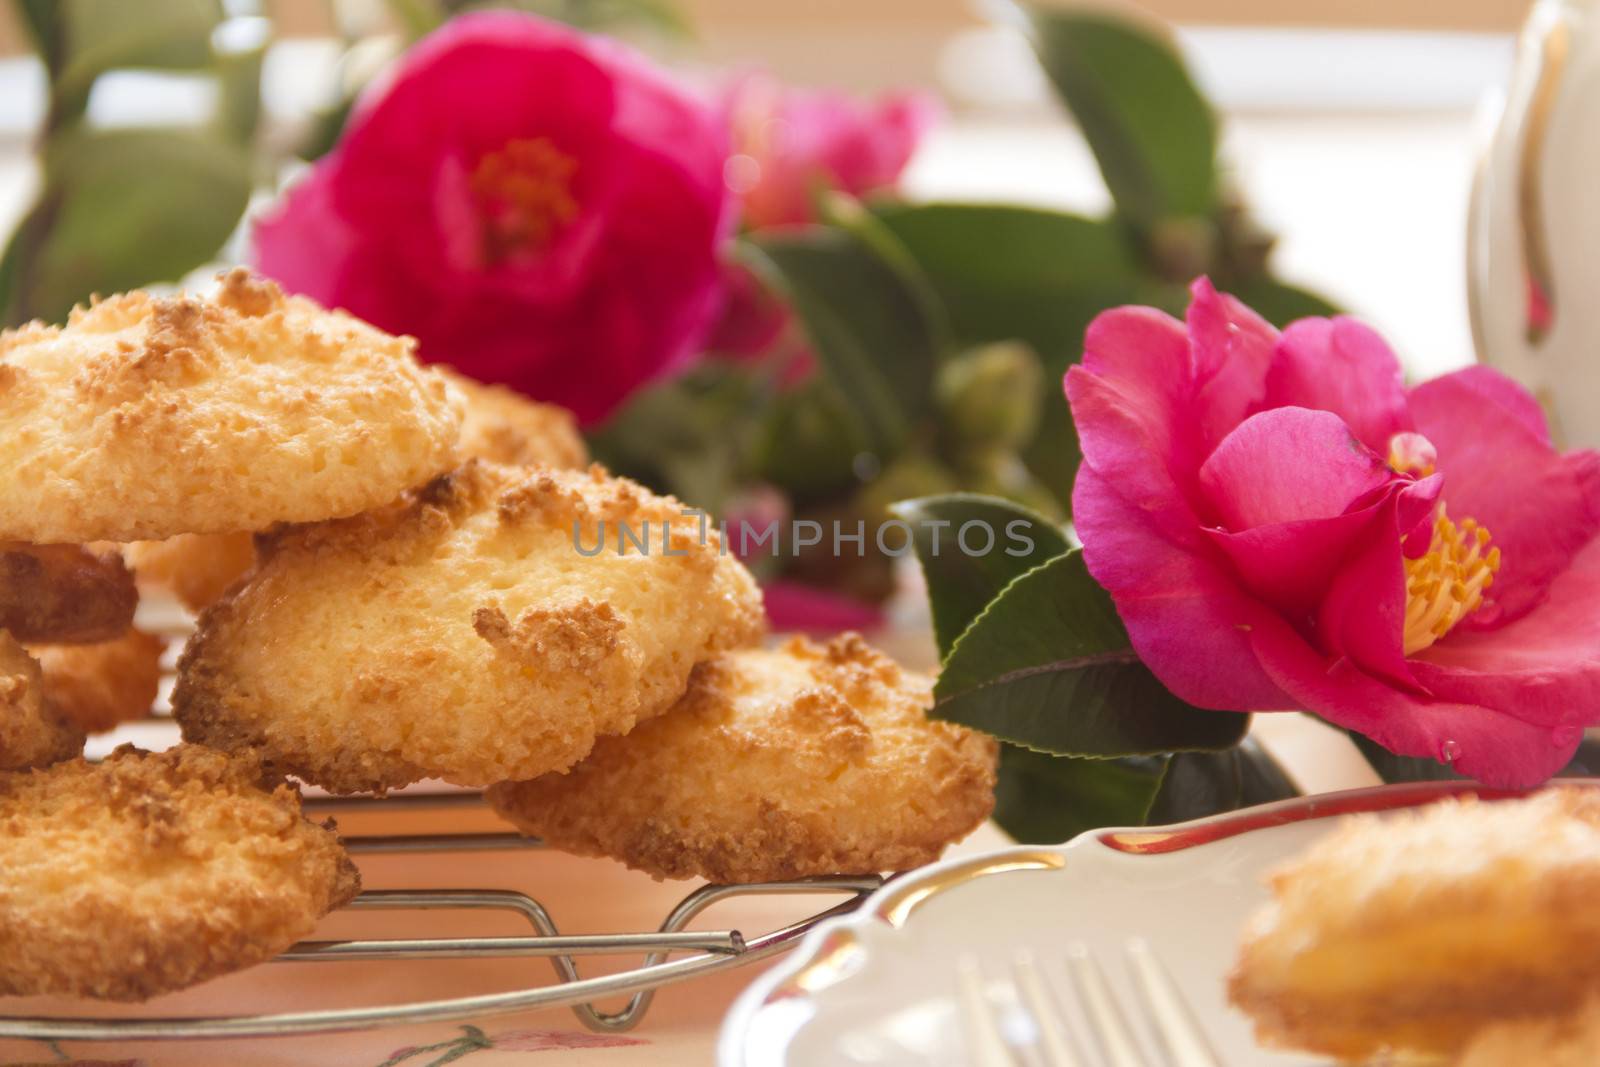 Fresh baked coconut macaroons with camellias in the background ready to serve.